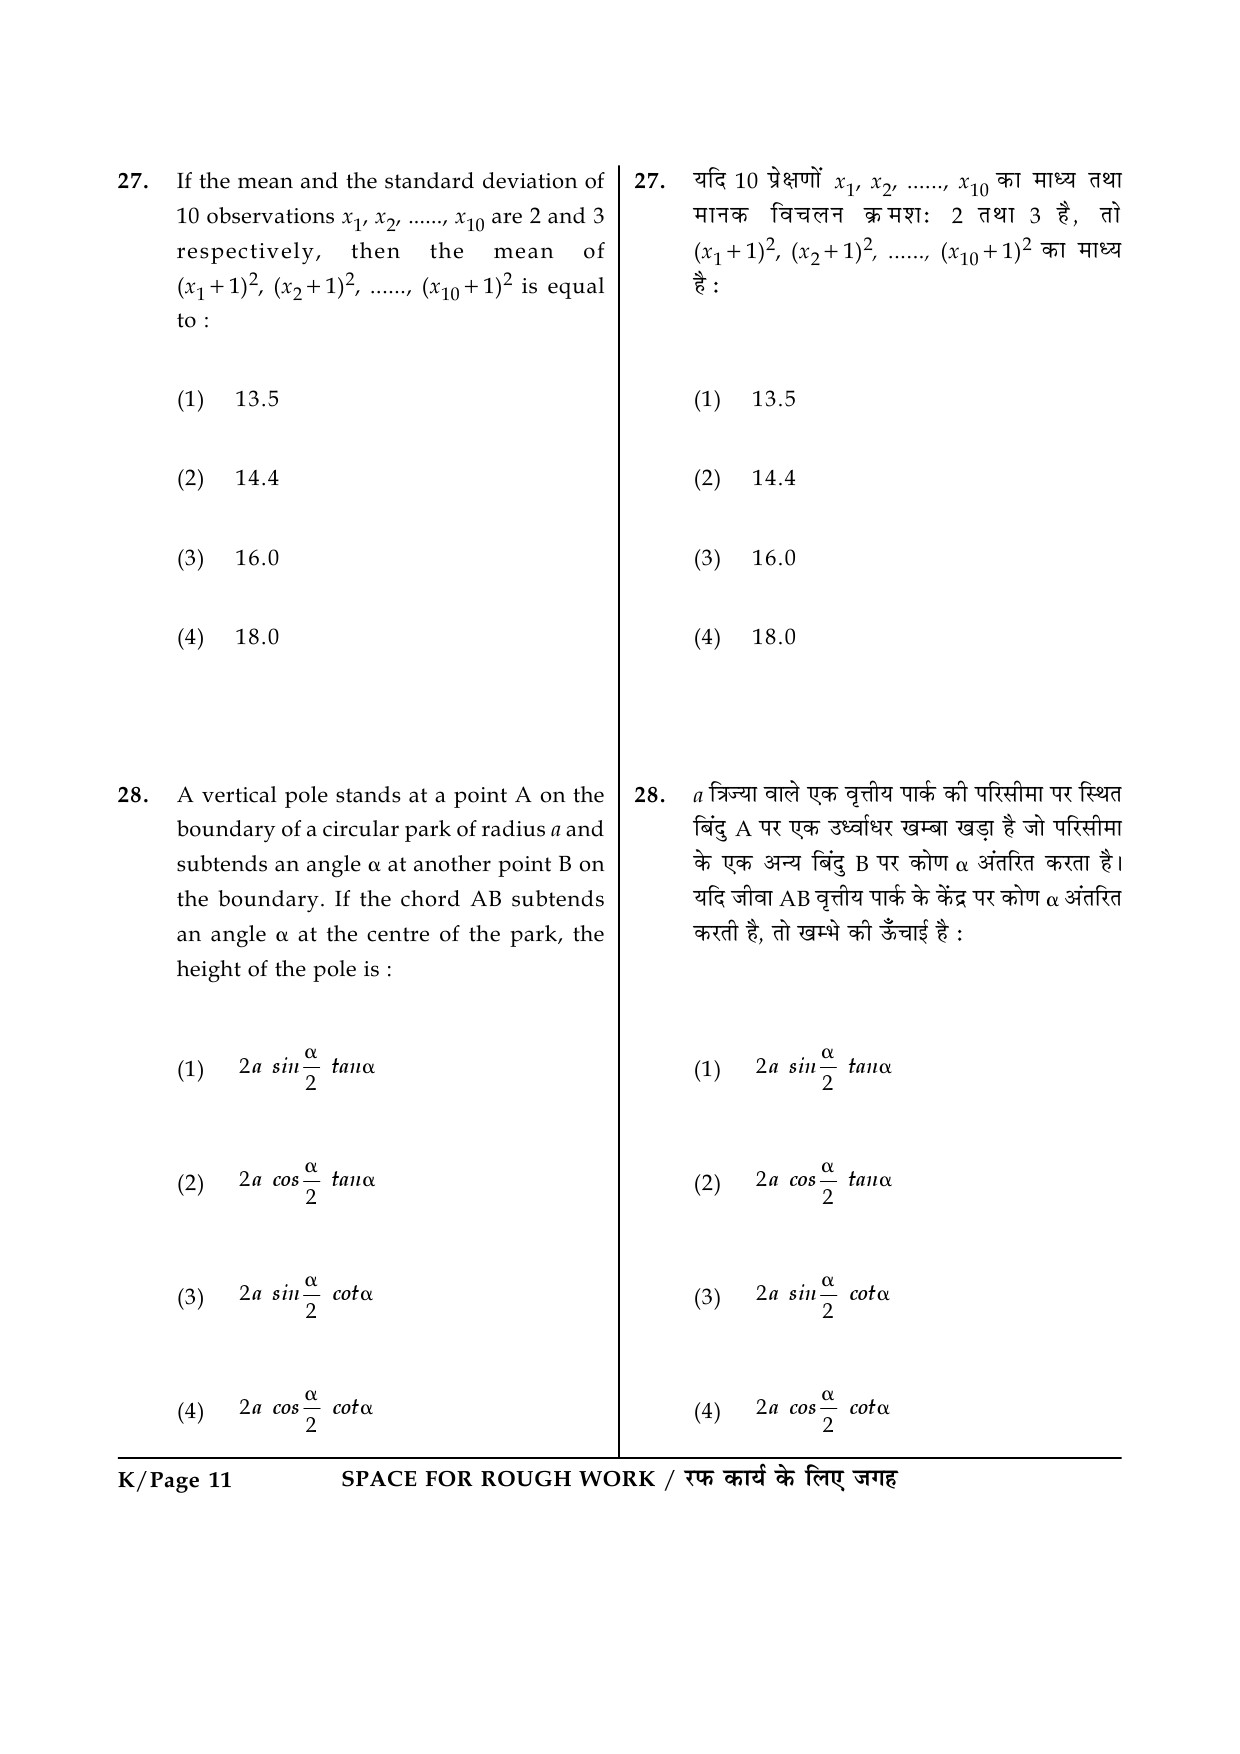 JEE Main Exam Question Paper 2015 Booklet K 11